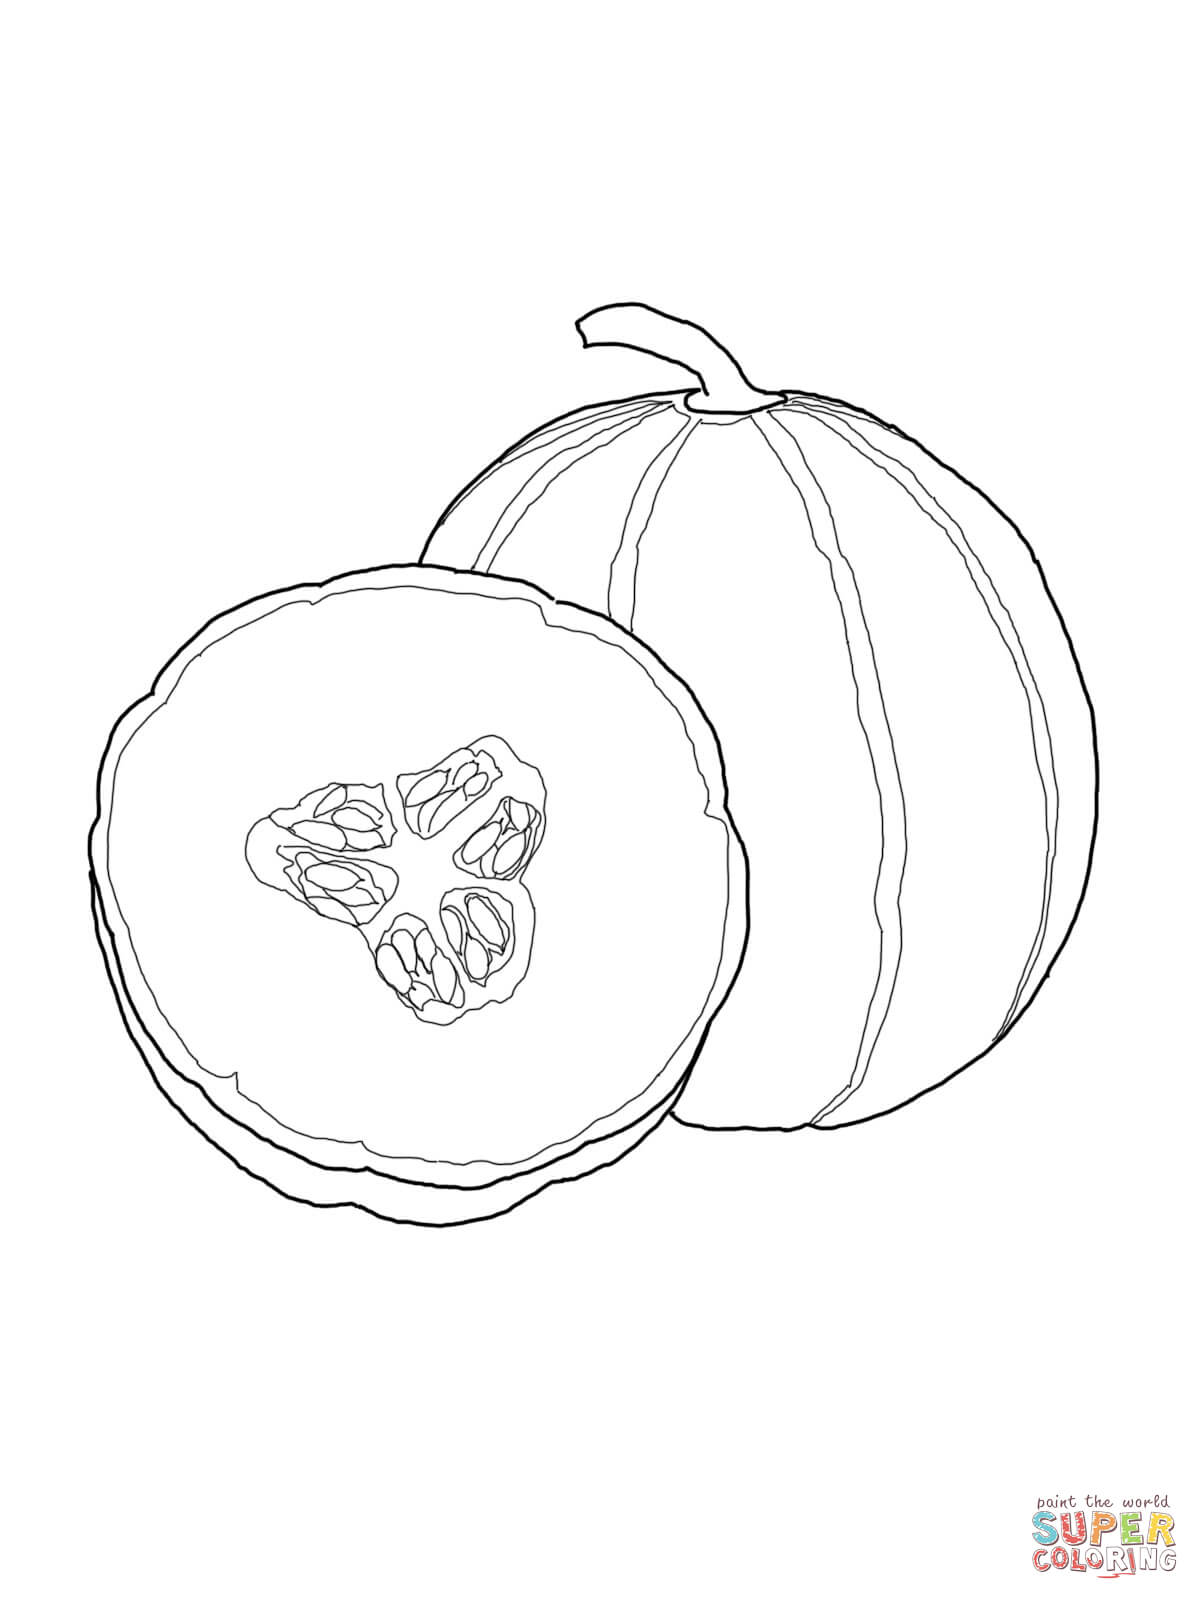 Cantaloupe coloring page | Free Printable Coloring Pages